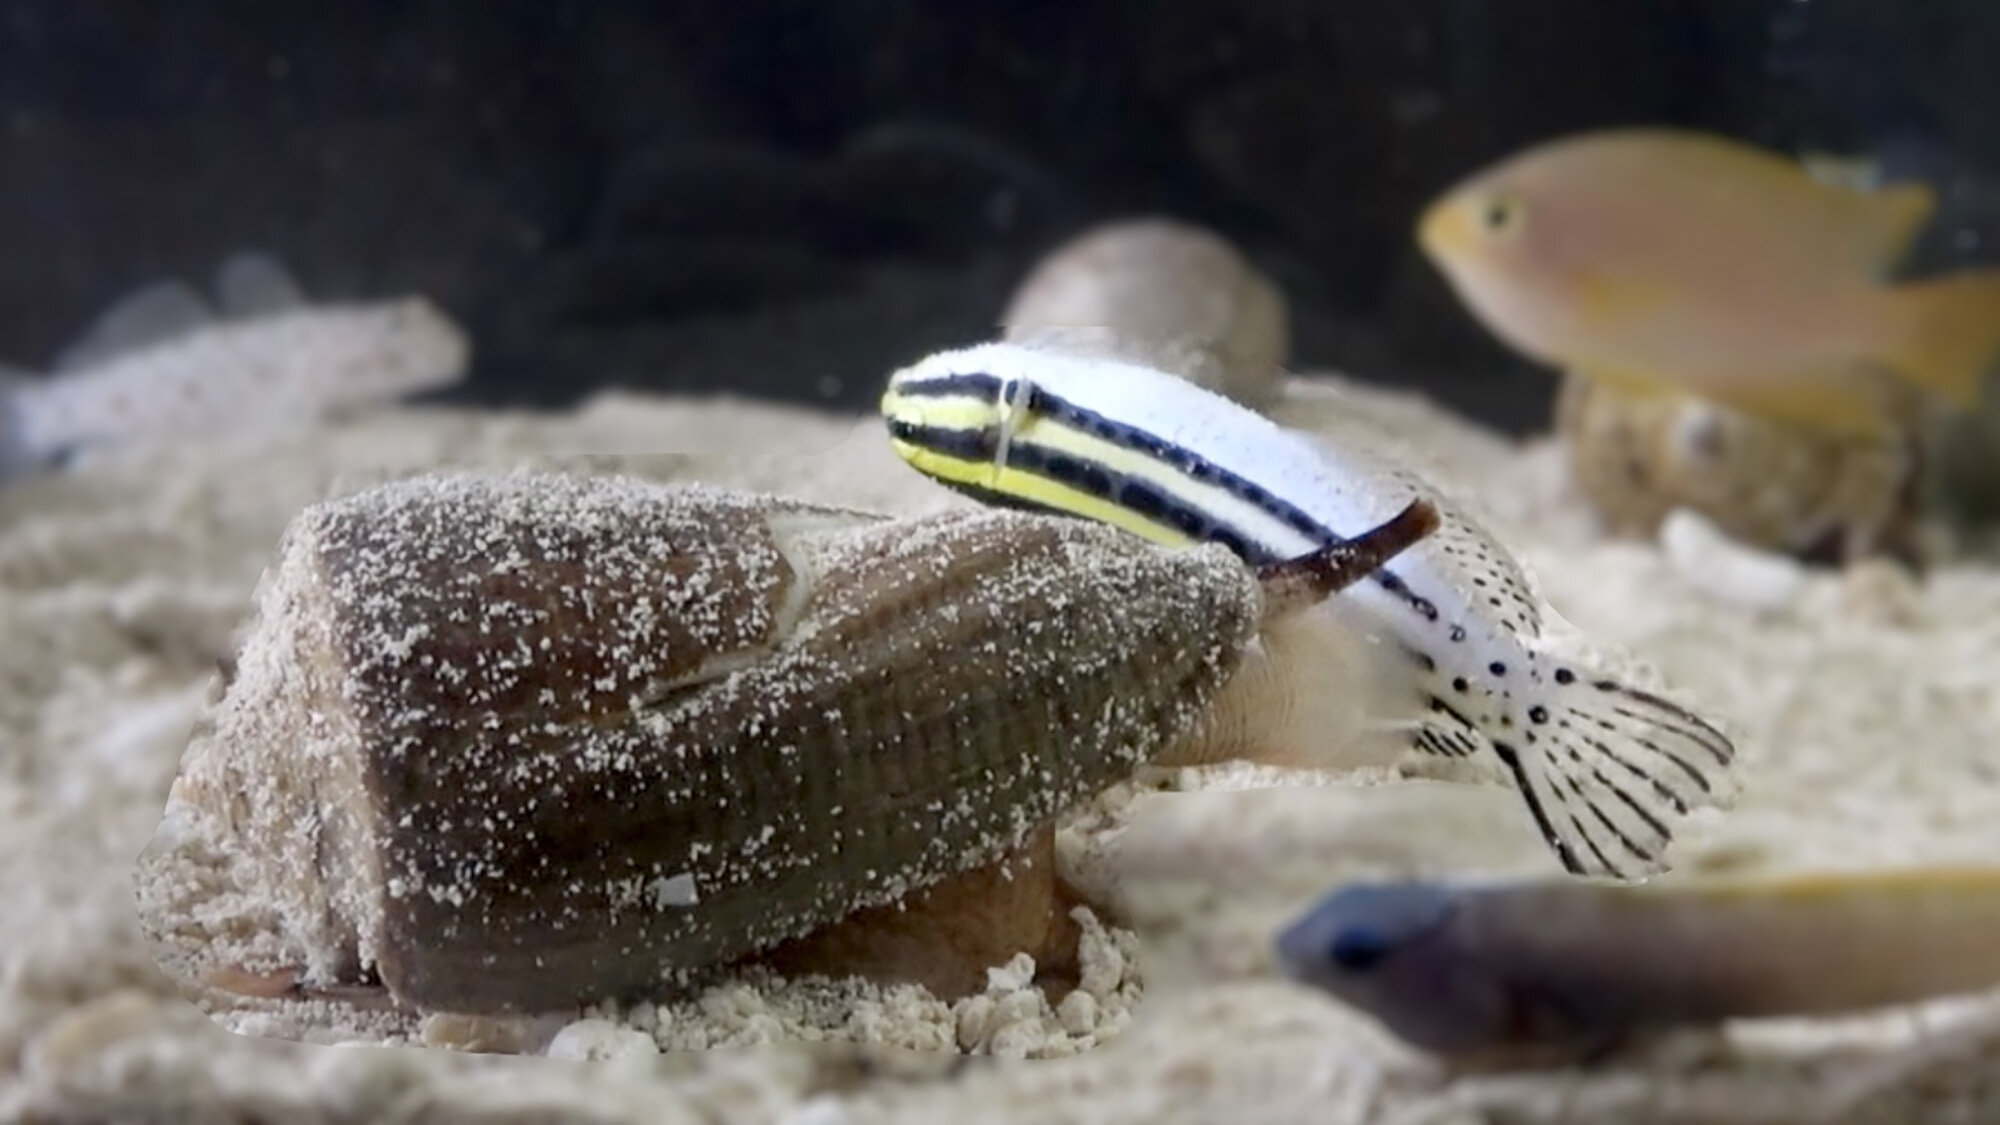 New potentially painkilling compound found in deep-water cone snails